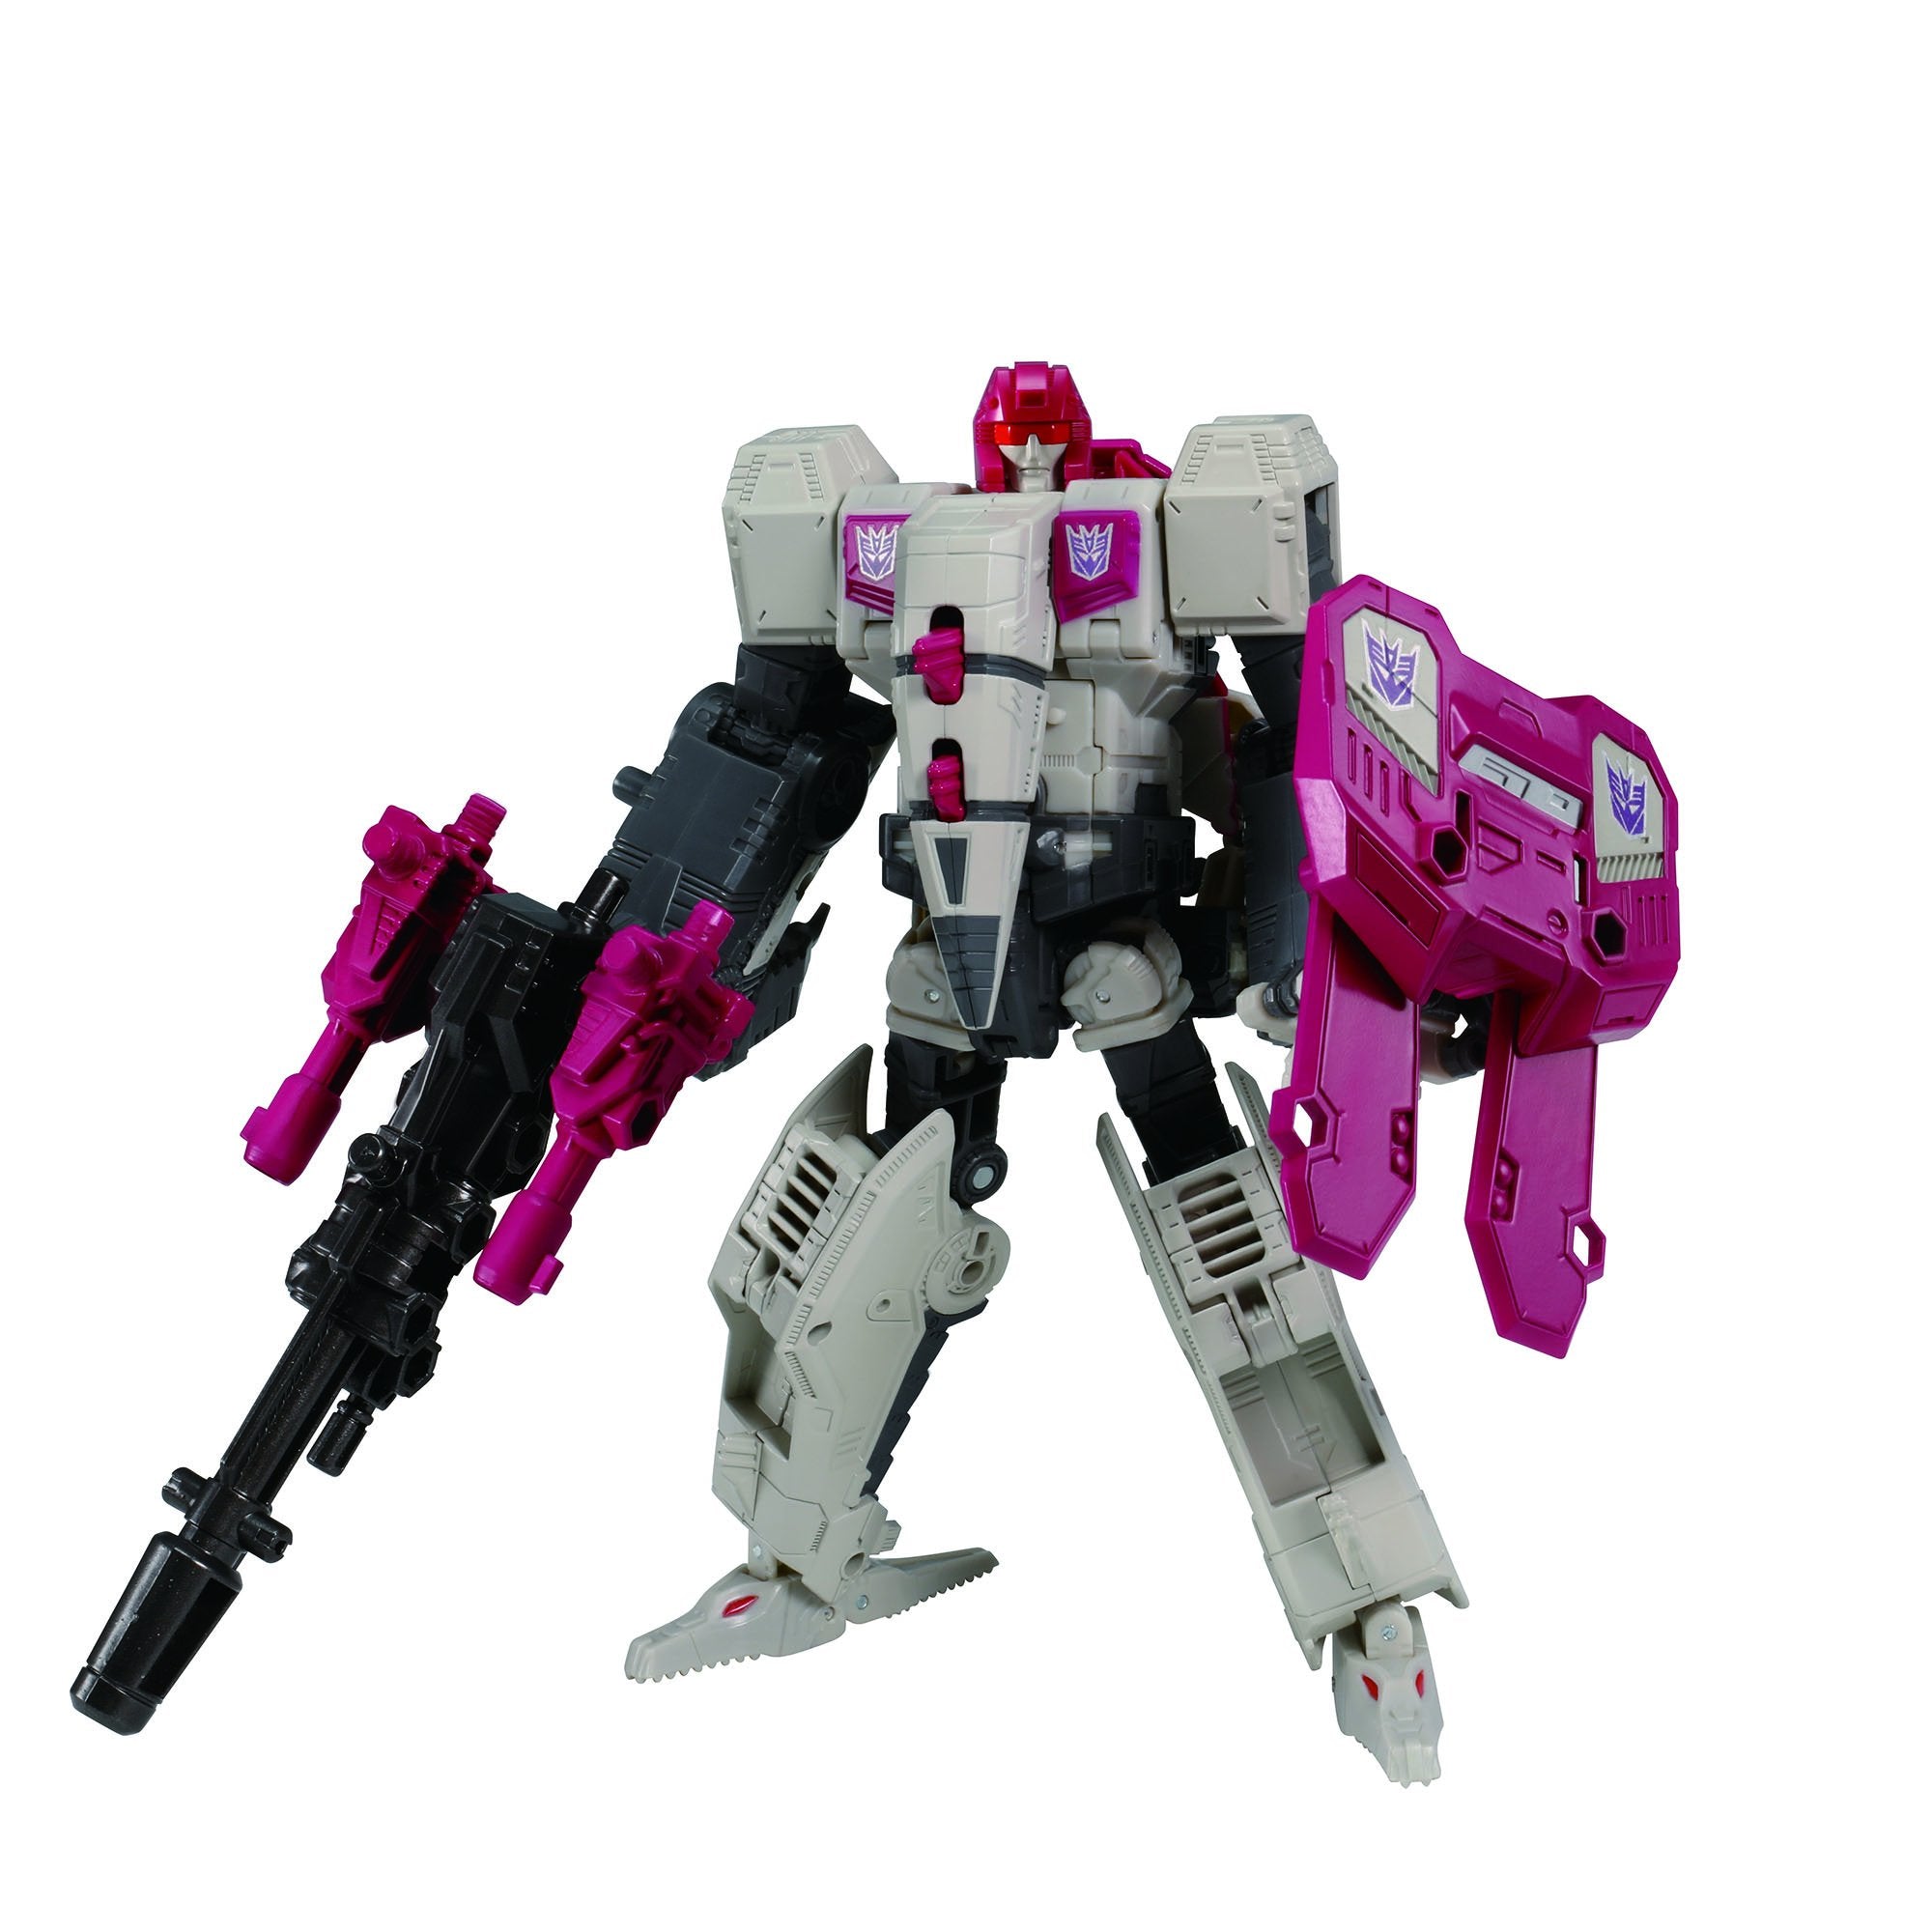 TakaraTomy - Transformers Generations Selects - Abominus (TakaraTomy Mall Exclusive) - Marvelous Toys